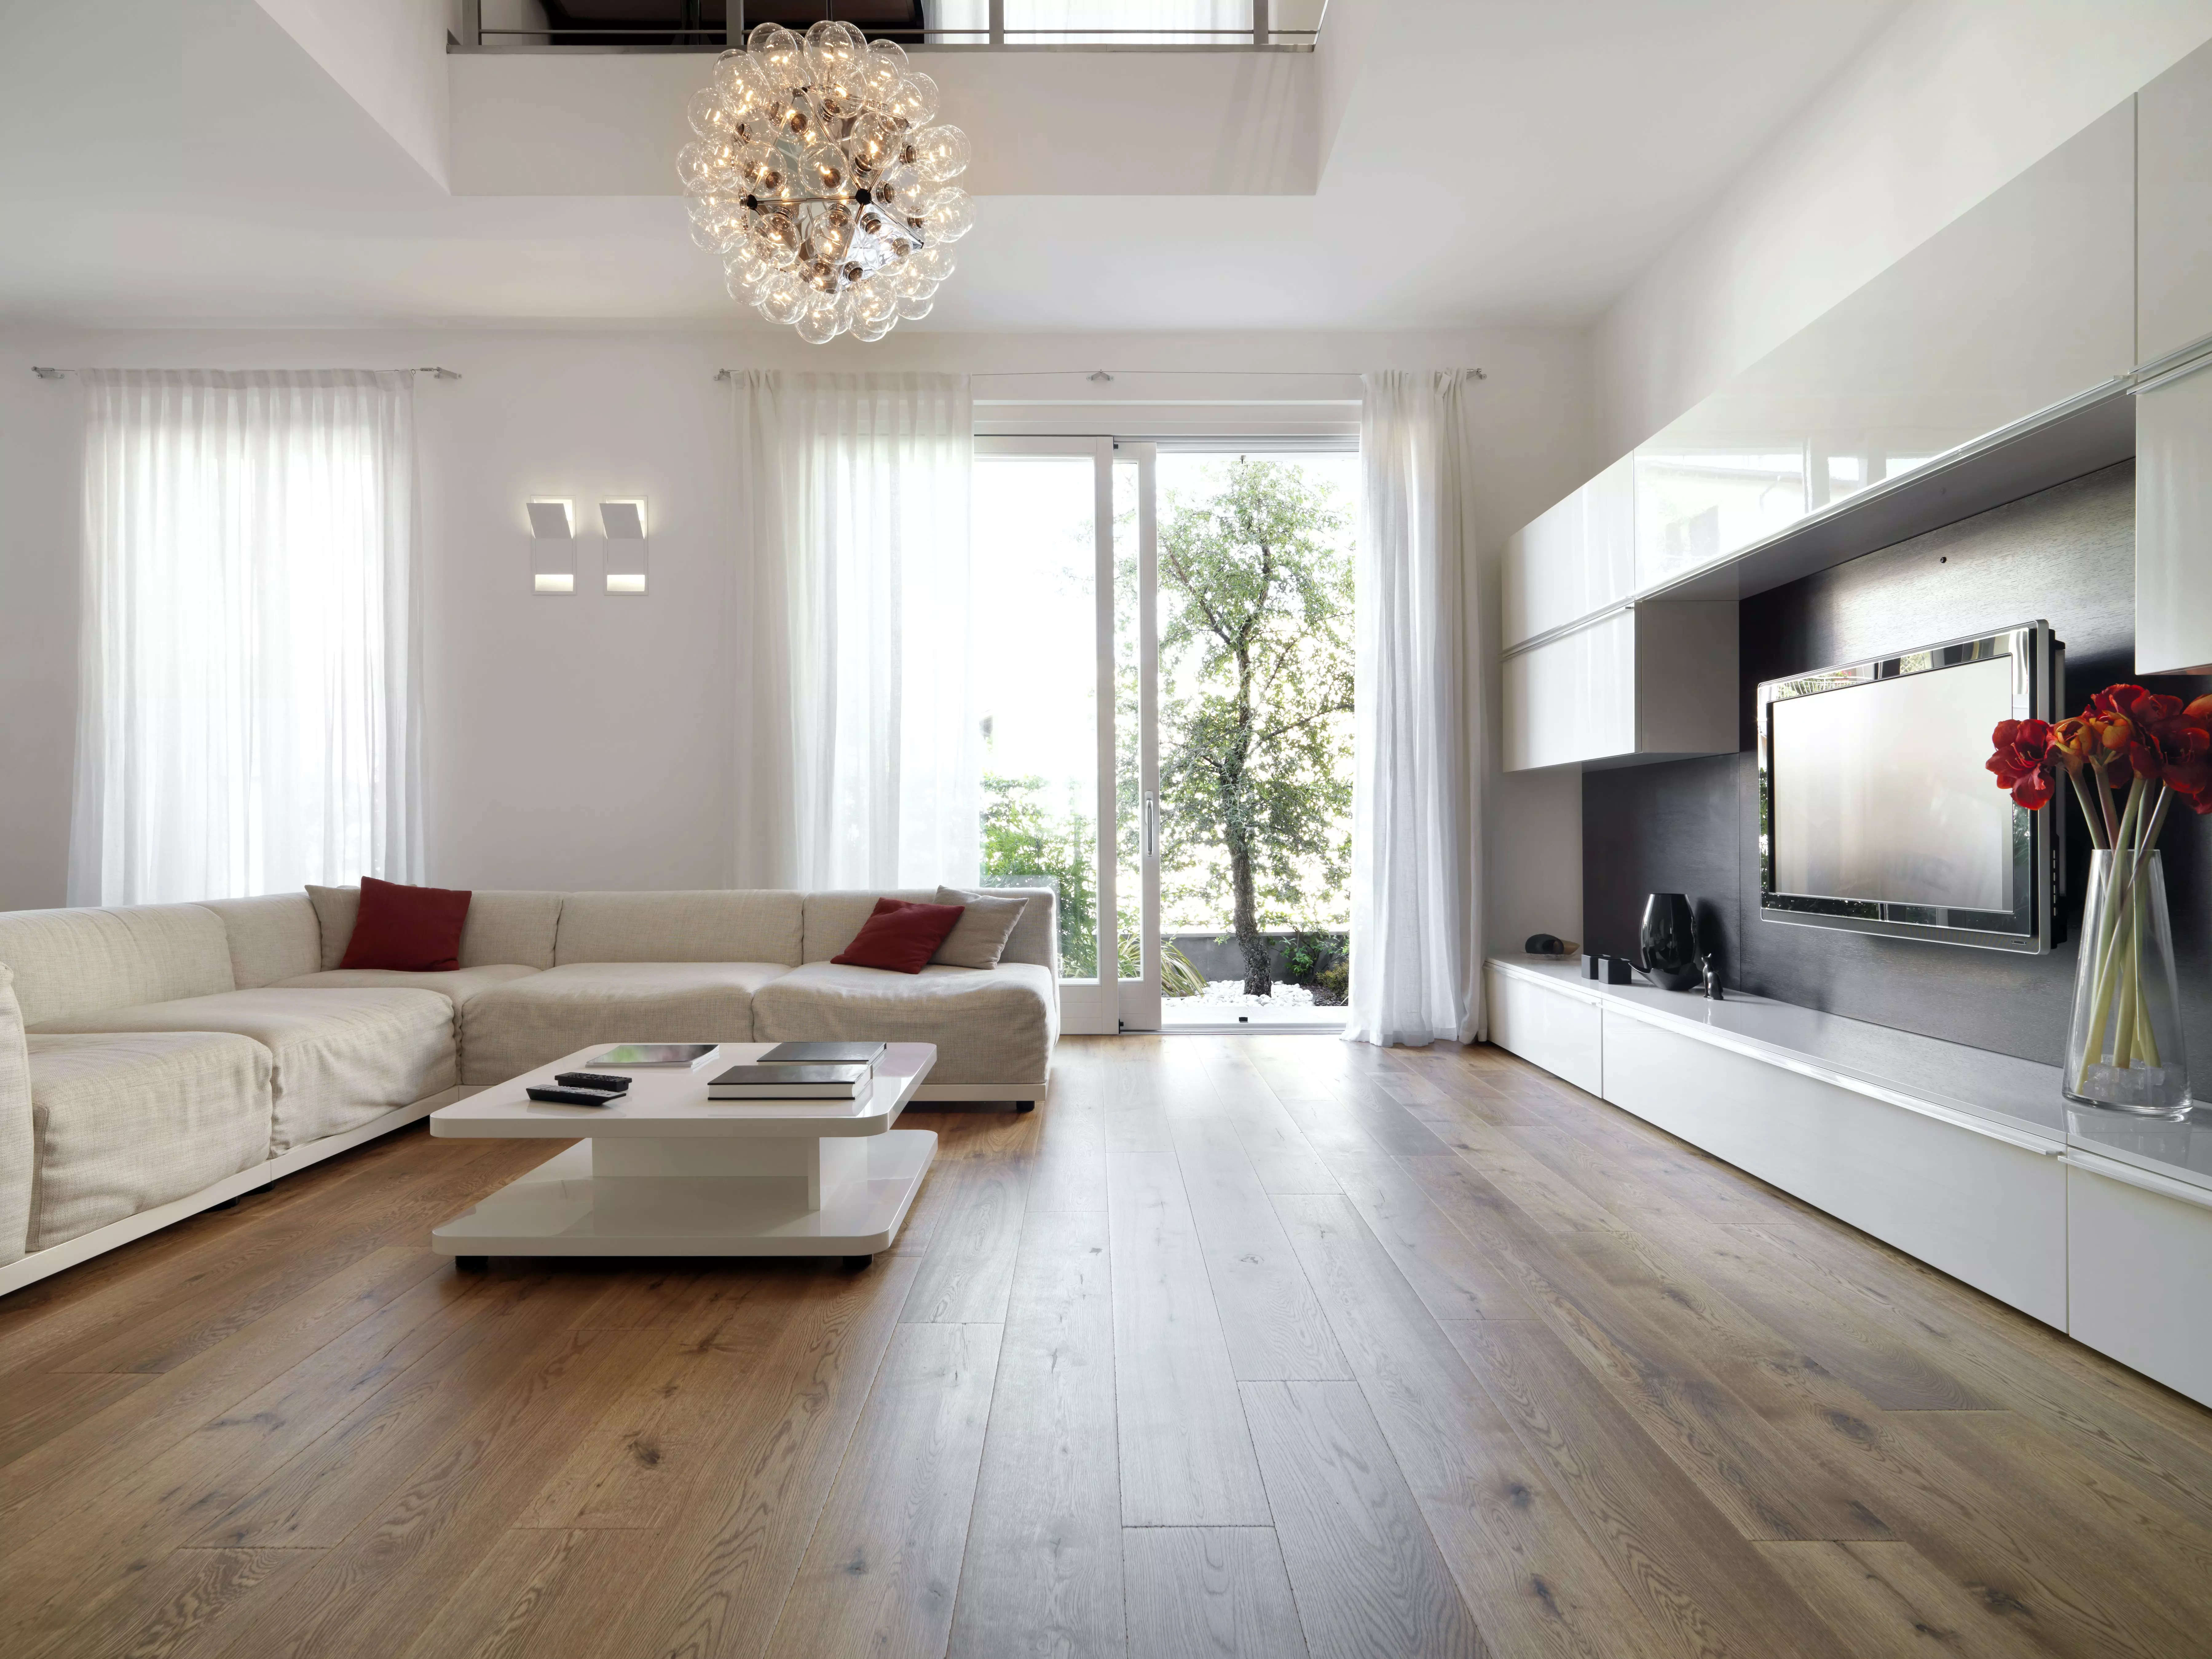 A living room with a white sofa, coffee table, TV, and bare hardwood floors